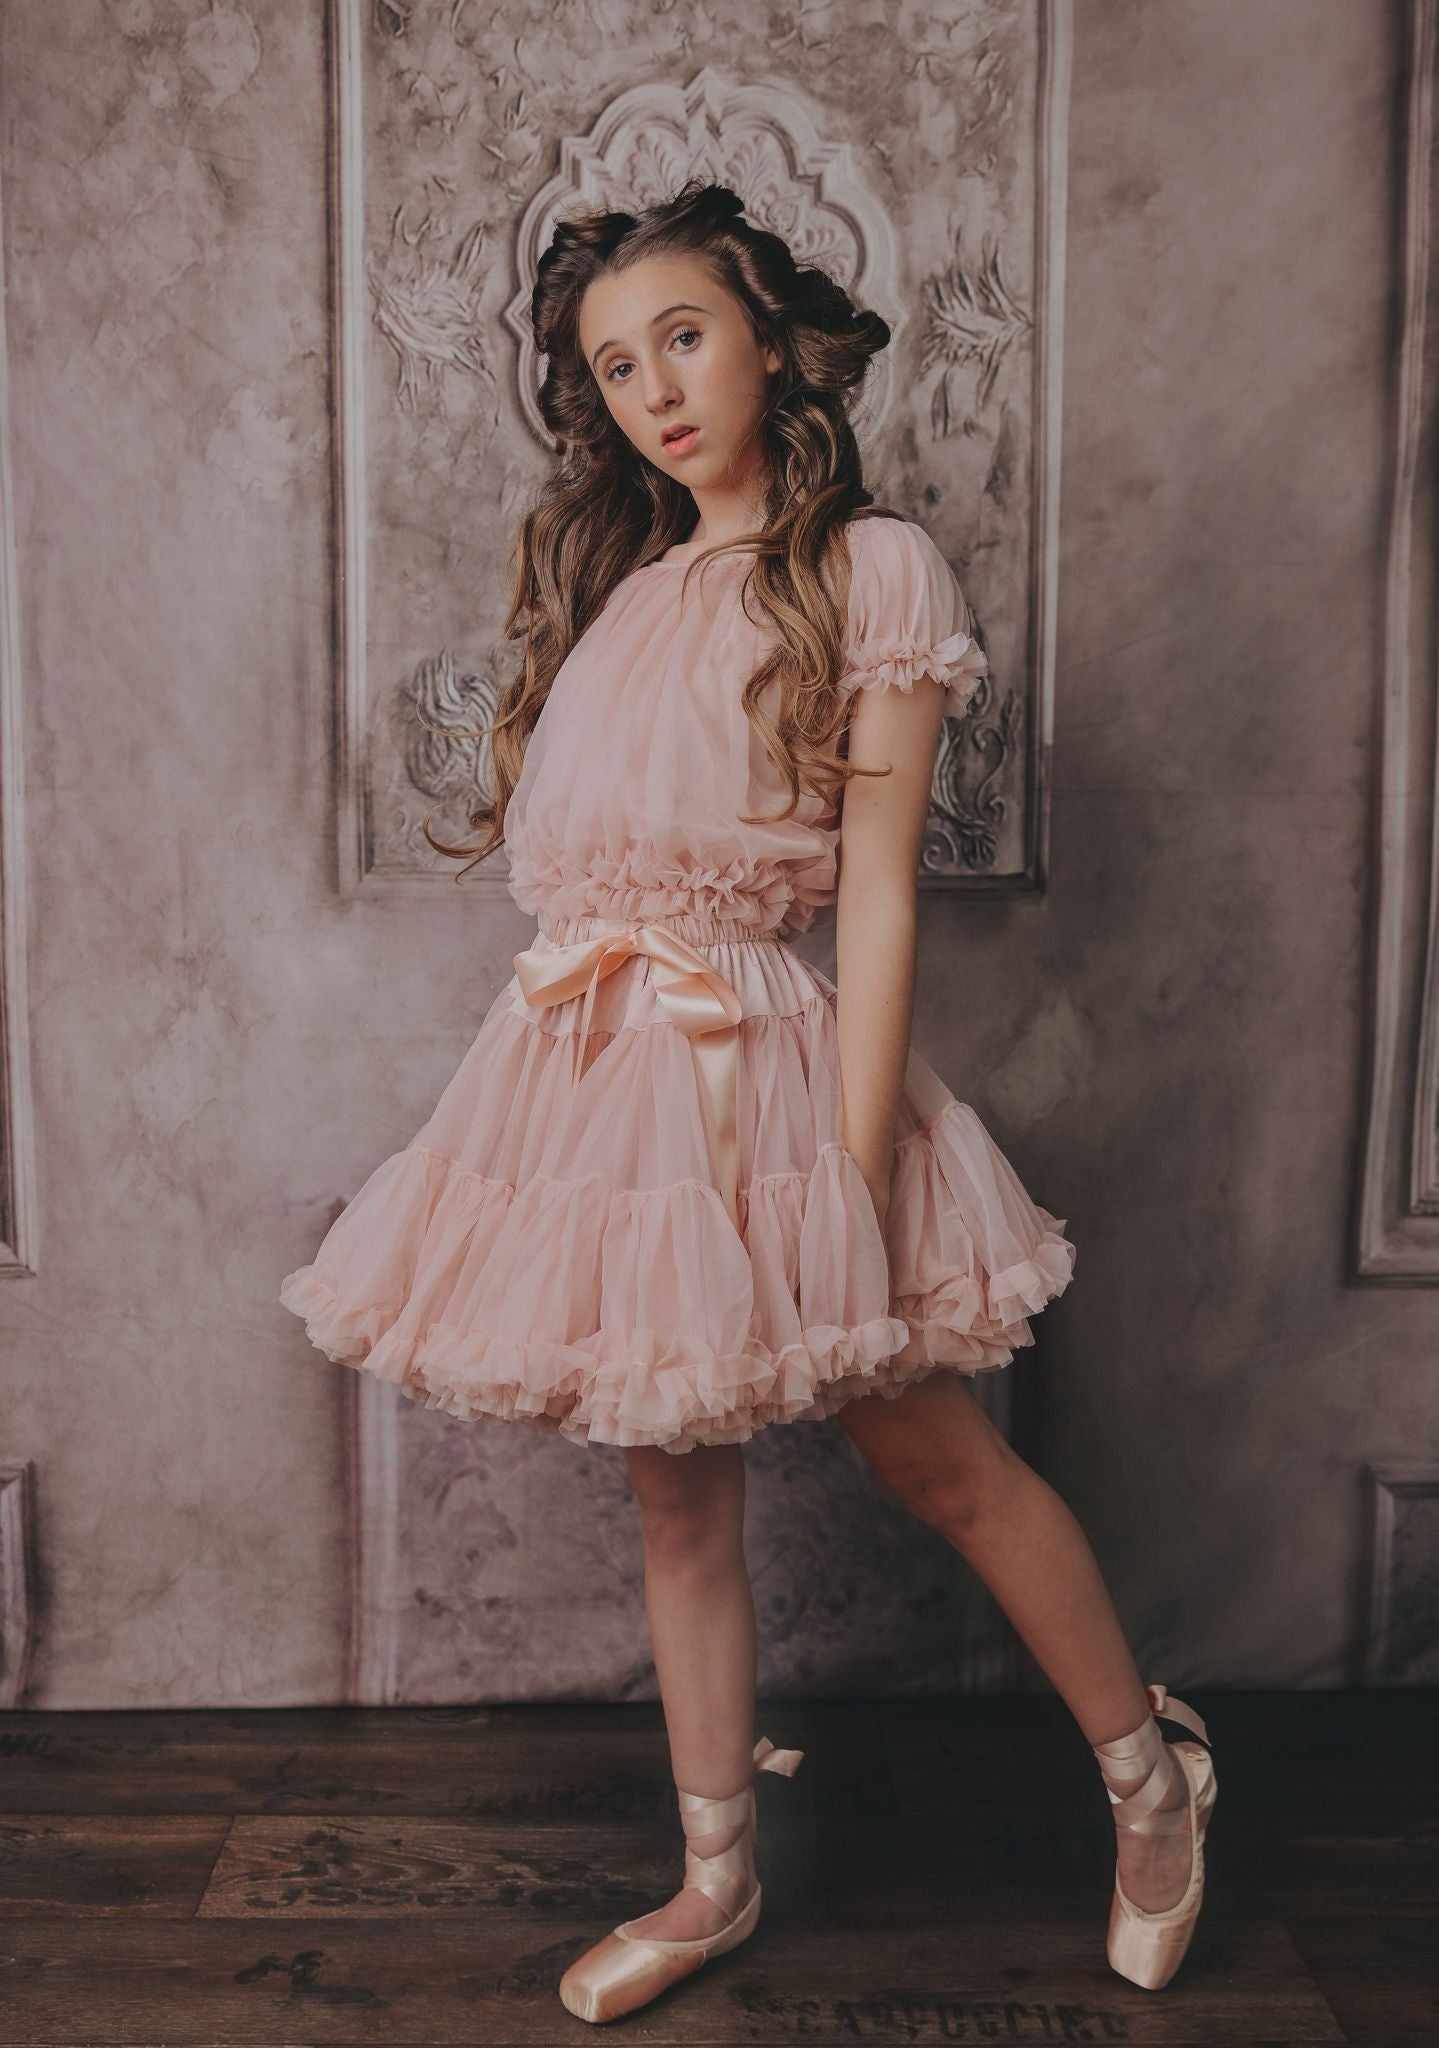 DOLLY by Le Petit Tom ® DOROTHY in the land of DOLLS pettiskirt ballet pink